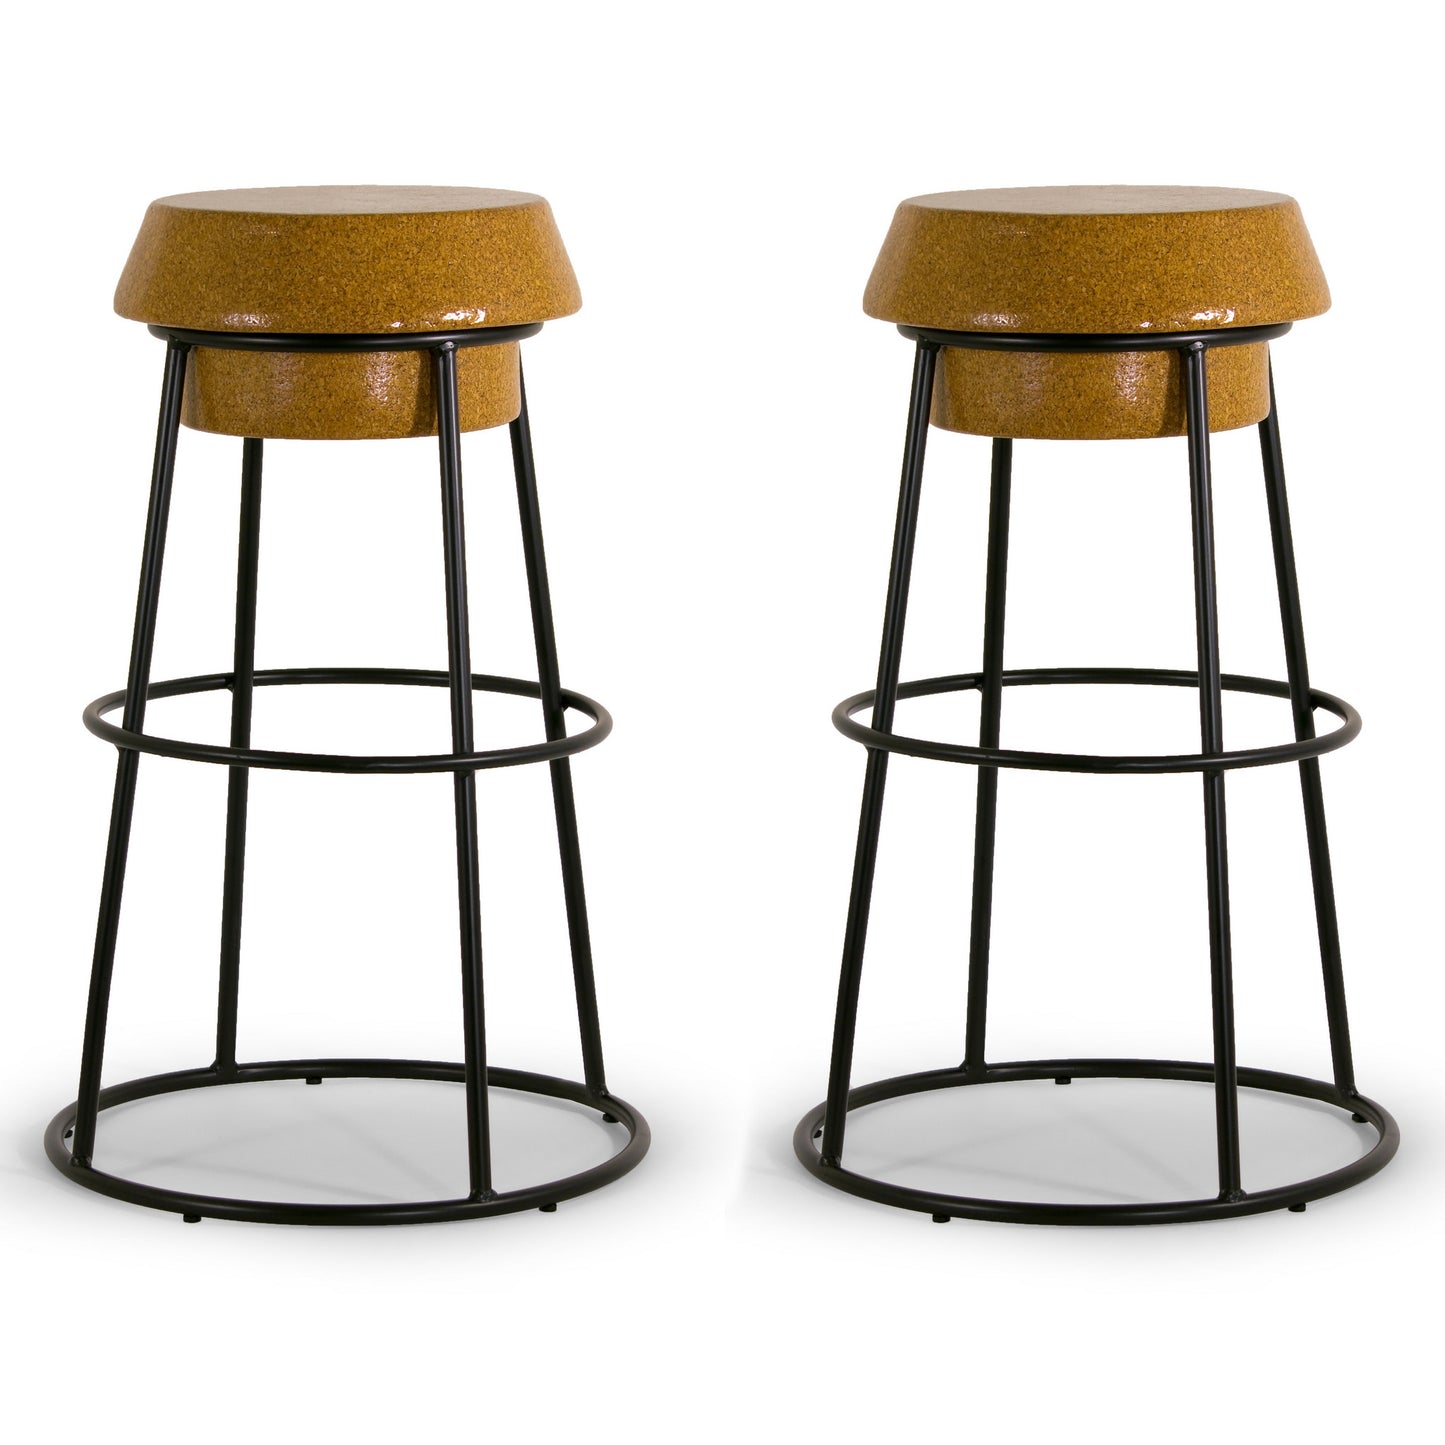 Set of 2 Happy Brown Wood Wine Cork Bar Stool with Black Iron Frame